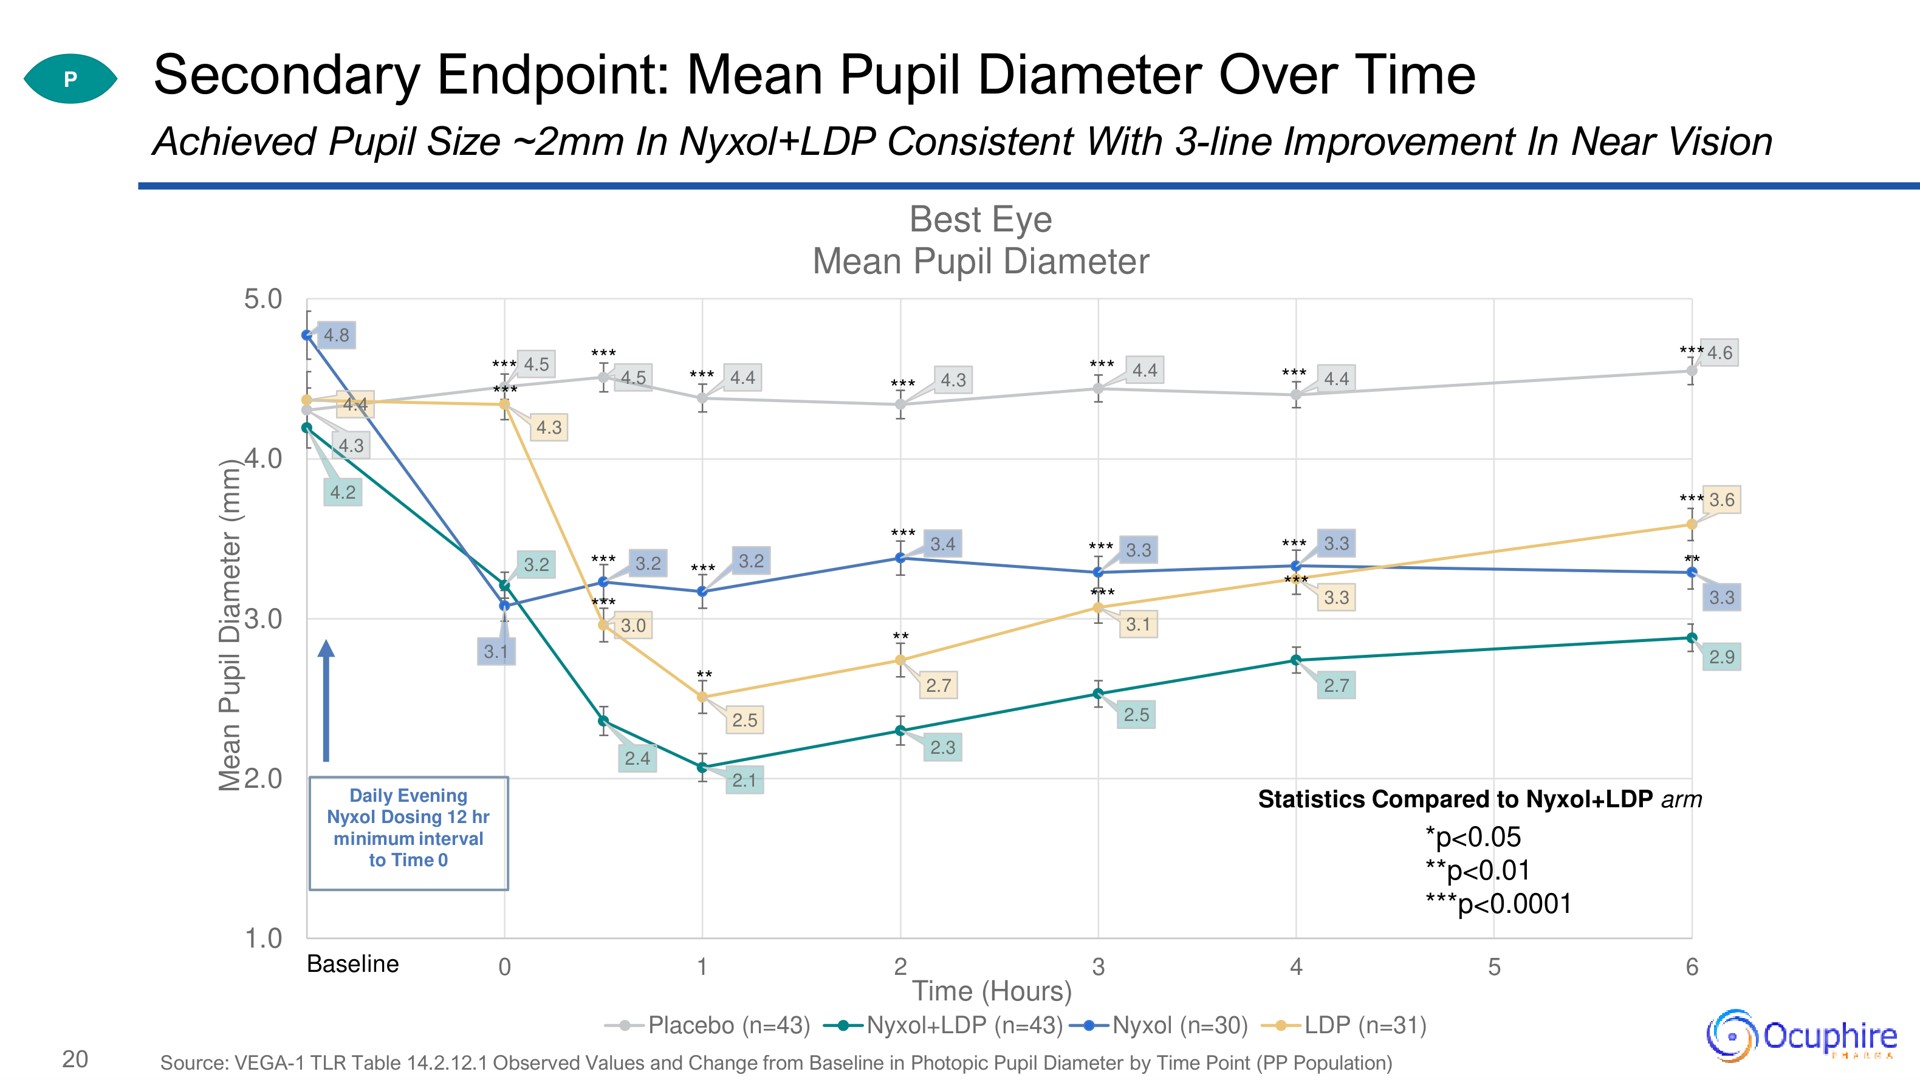 secondary mean pupil diameter over time | Ocuphire Pharma